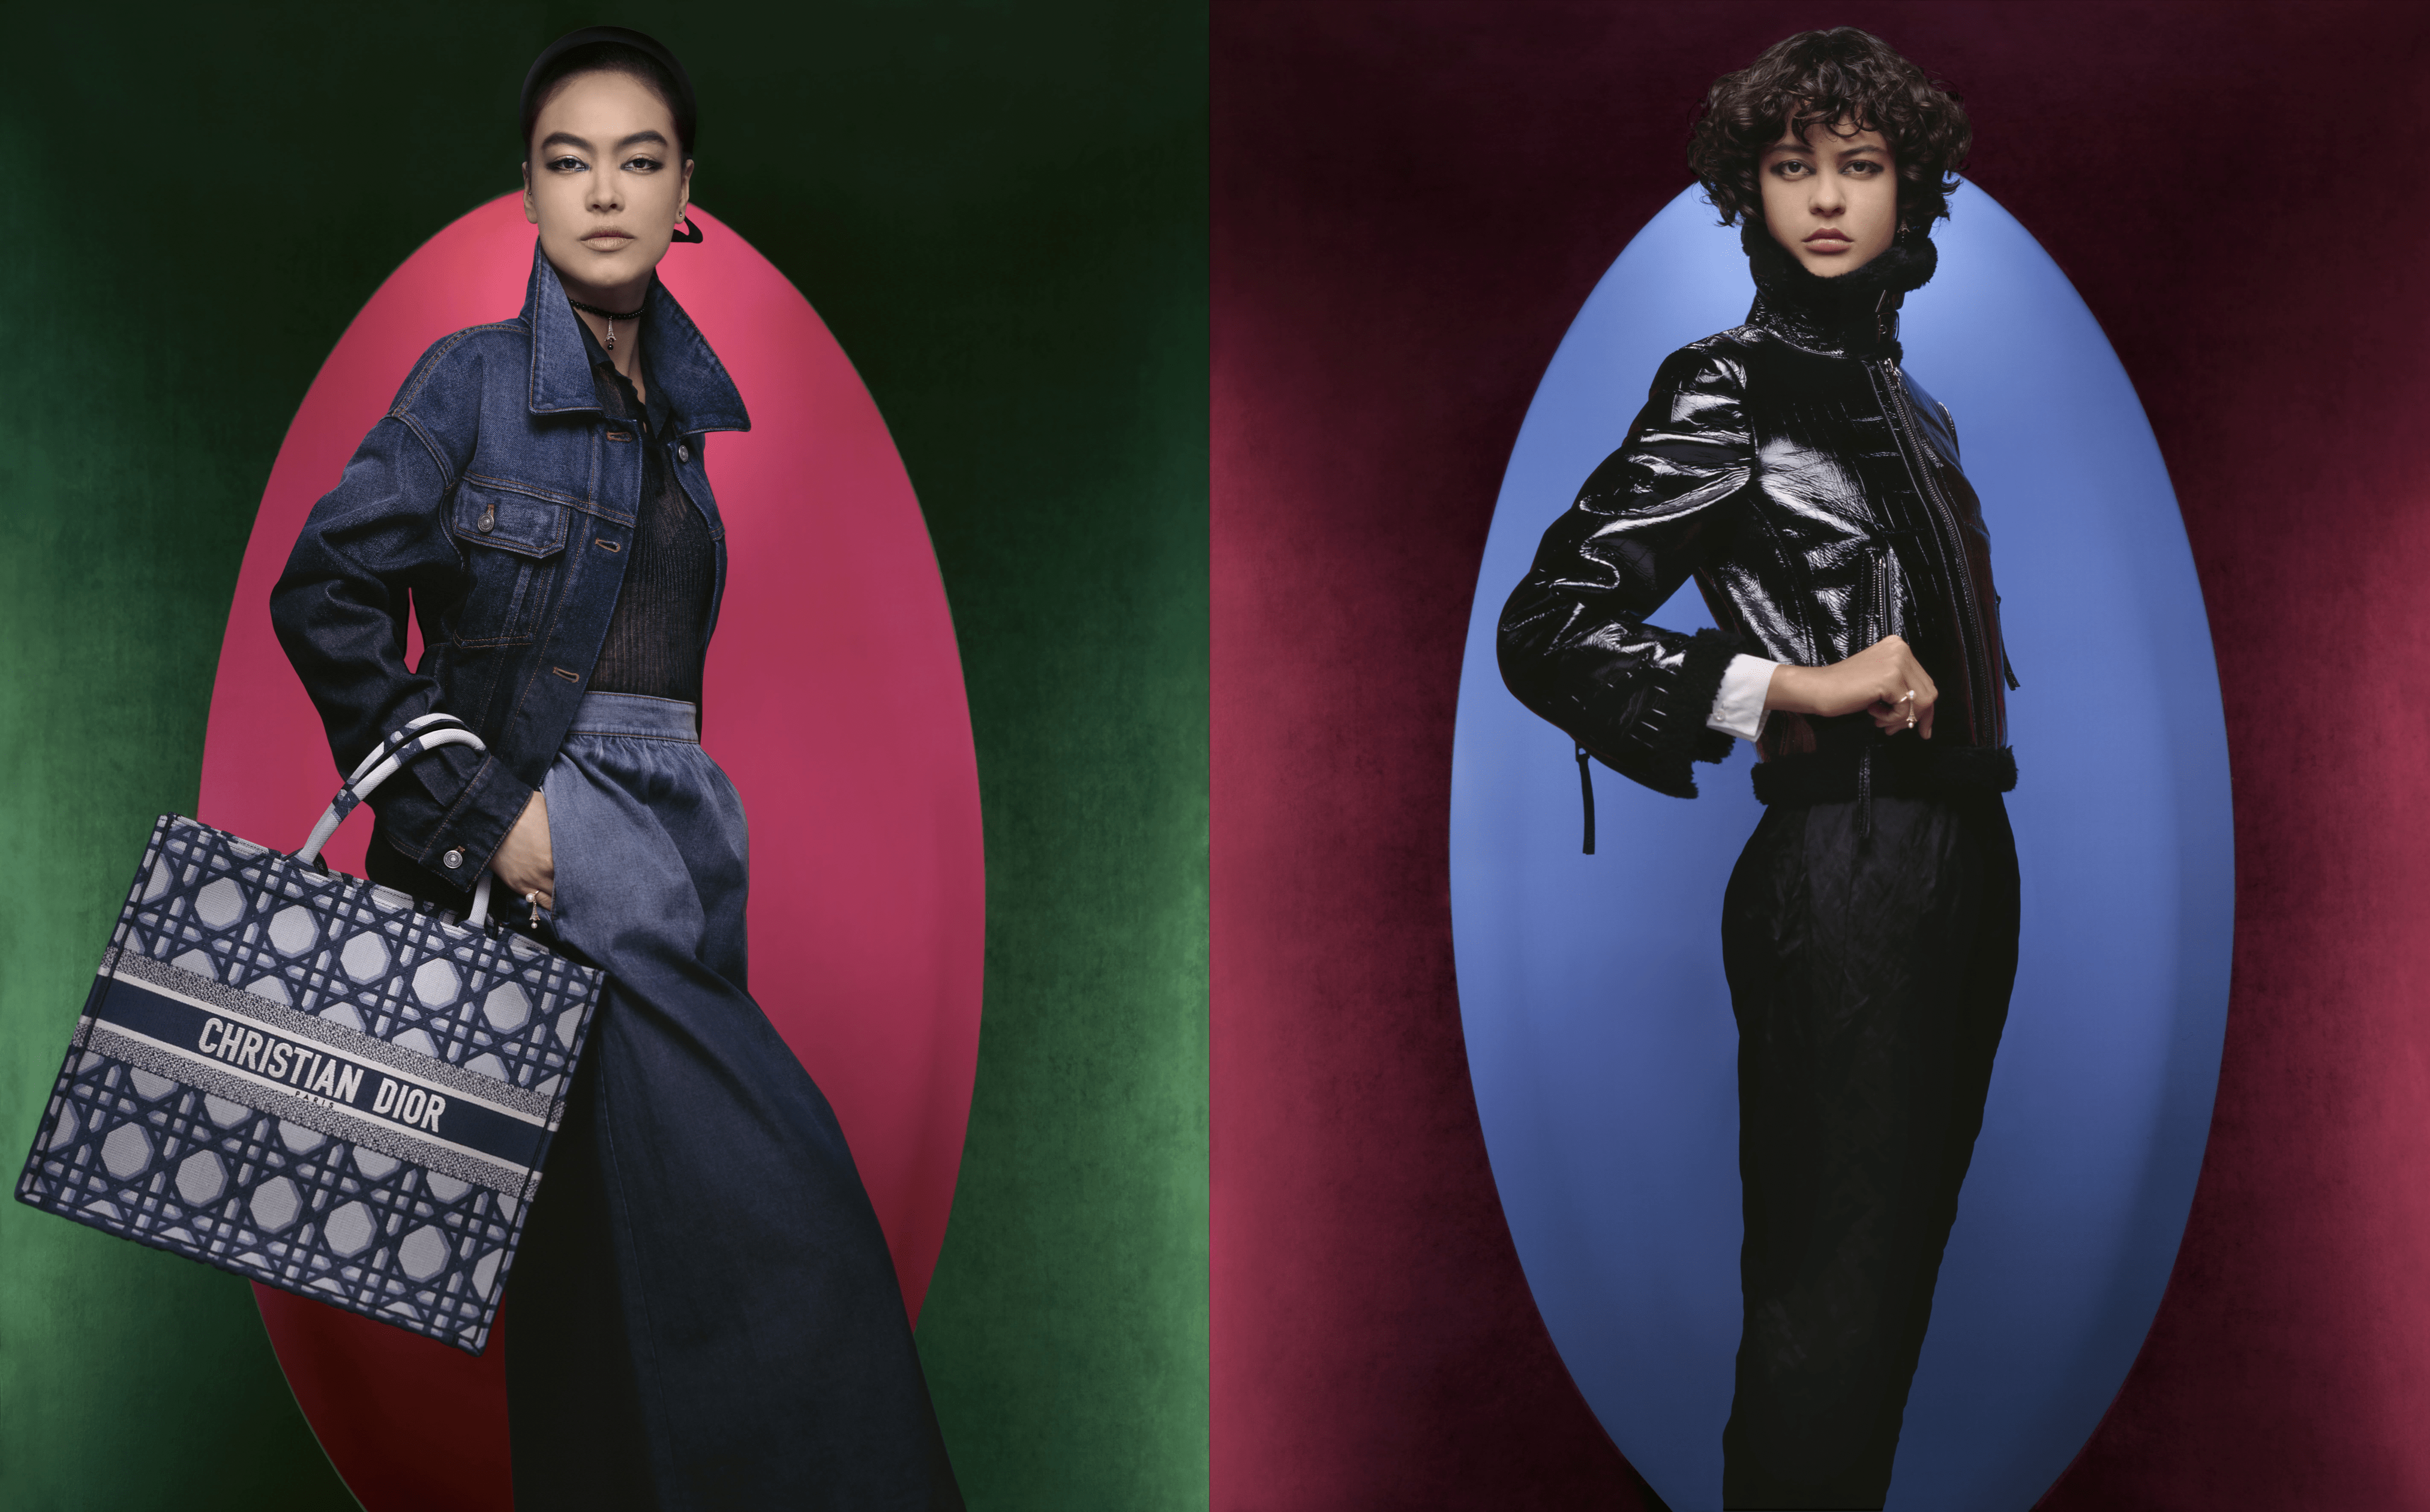 Dior SS 2023 campaign inspired by Catherine de Medici